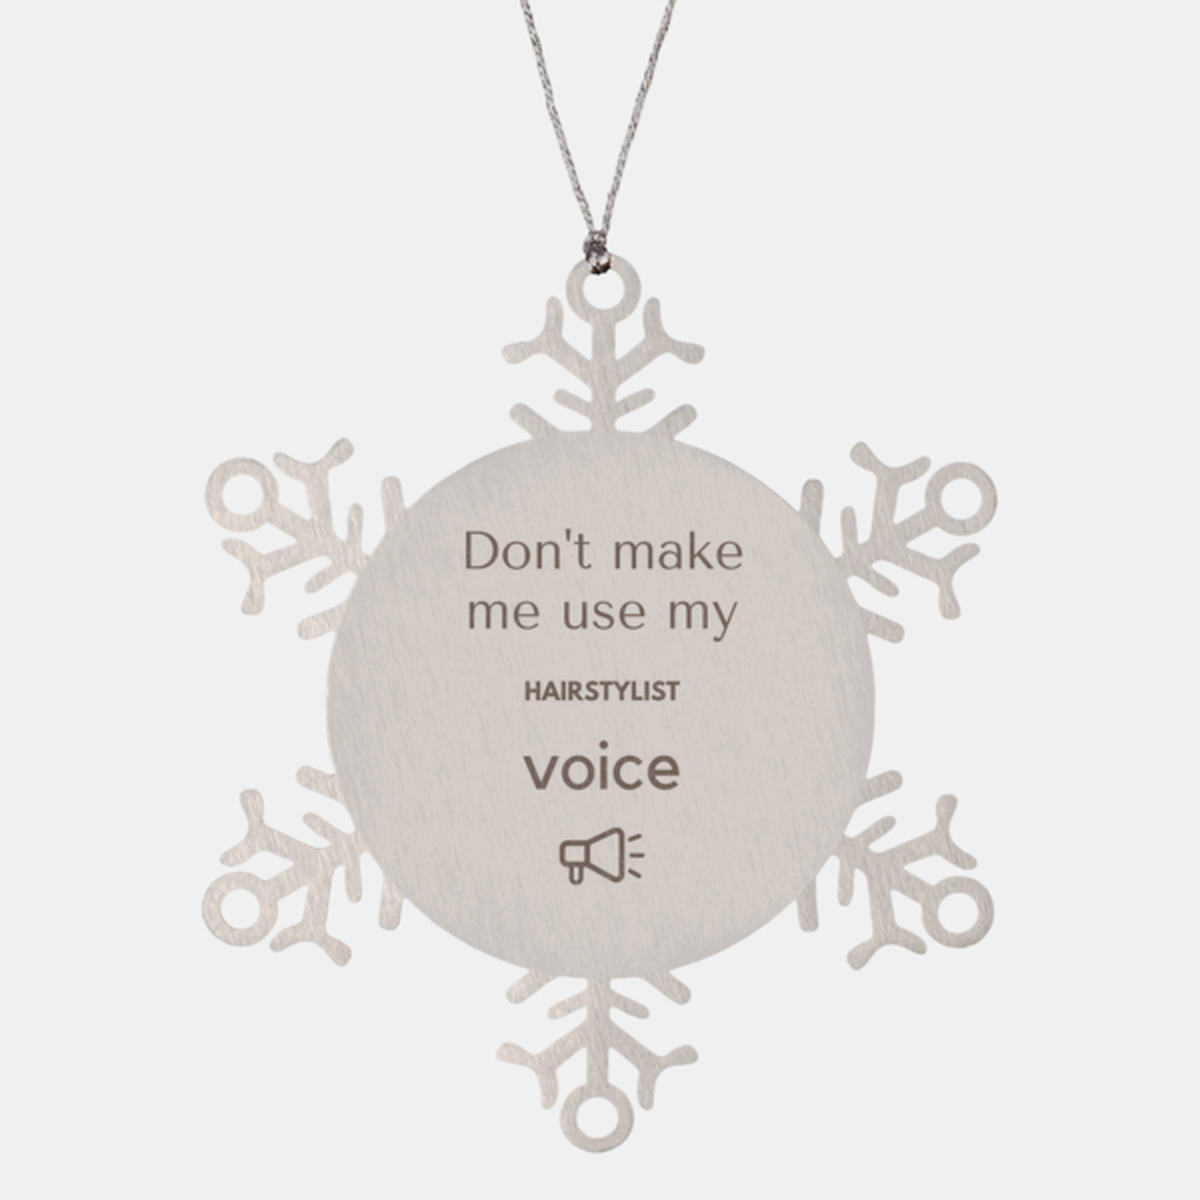 Don't make me use my Hairstylist voice, Sarcasm Hairstylist Ornament Gifts, Christmas Hairstylist Snowflake Ornament Unique Gifts For Hairstylist Coworkers, Men, Women, Colleague, Friends